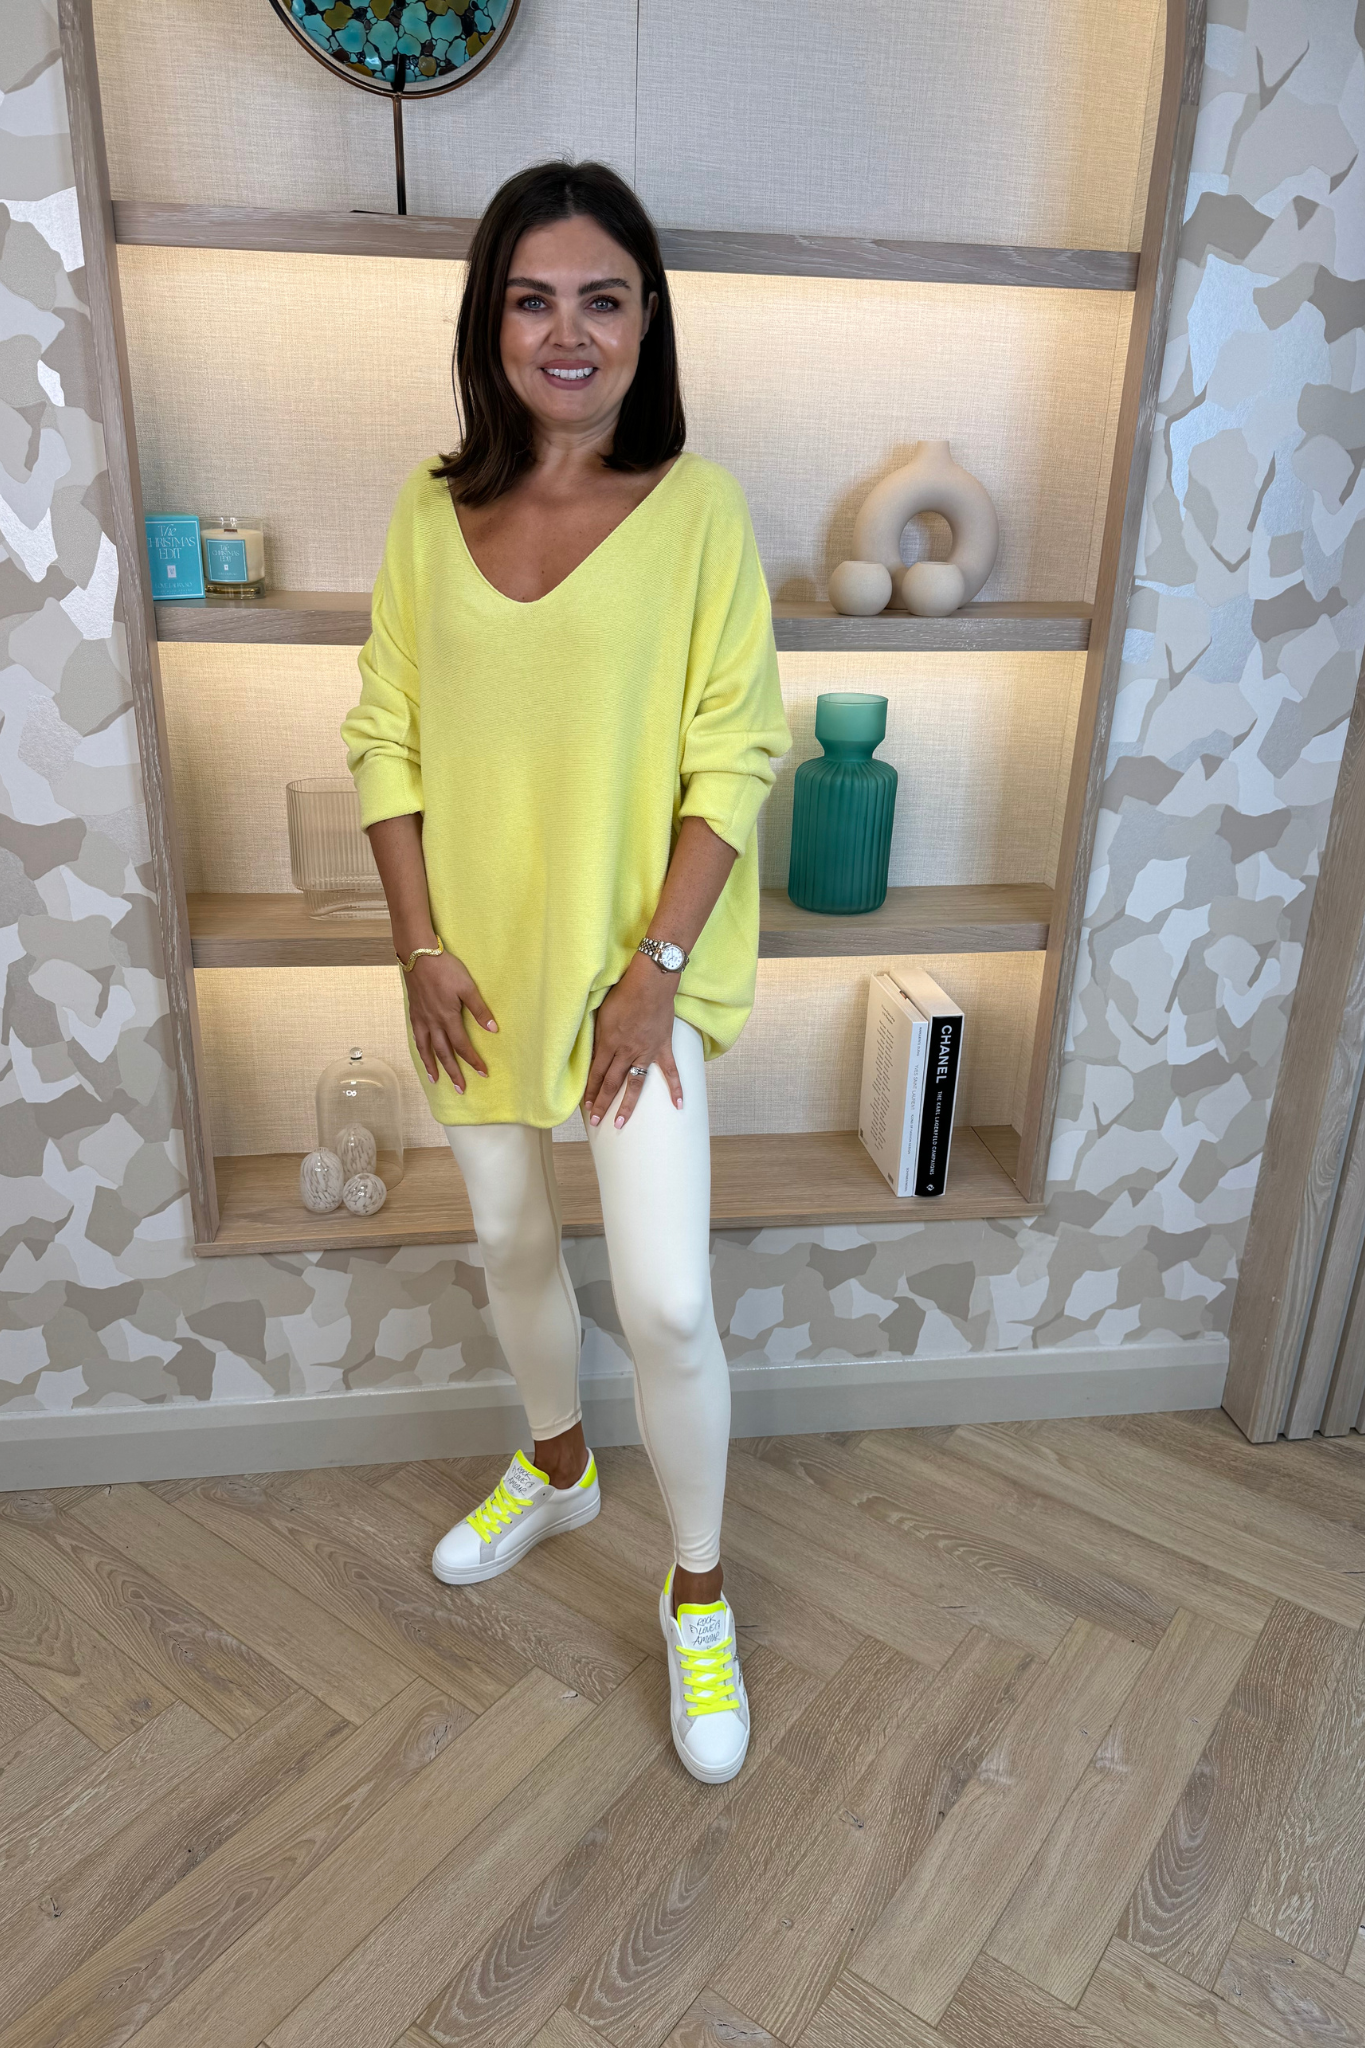 Amber V-Neck Jumper In Yellow